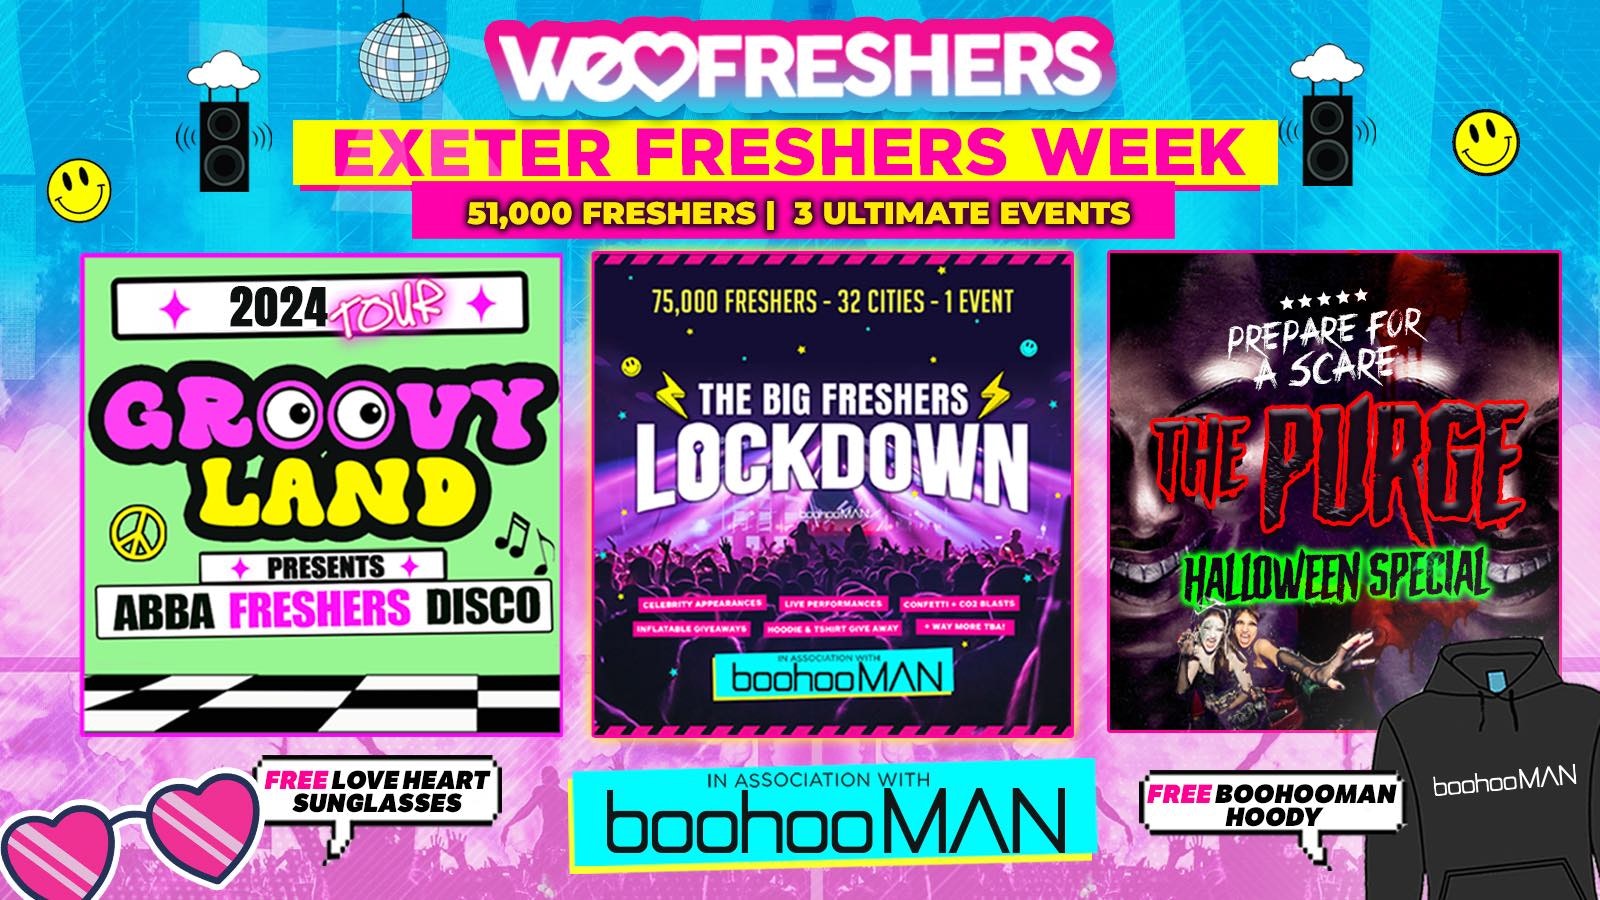 WE LOVE EXETER FRESHERS 2024 in association with boohooMAN -3 EVENTS❗